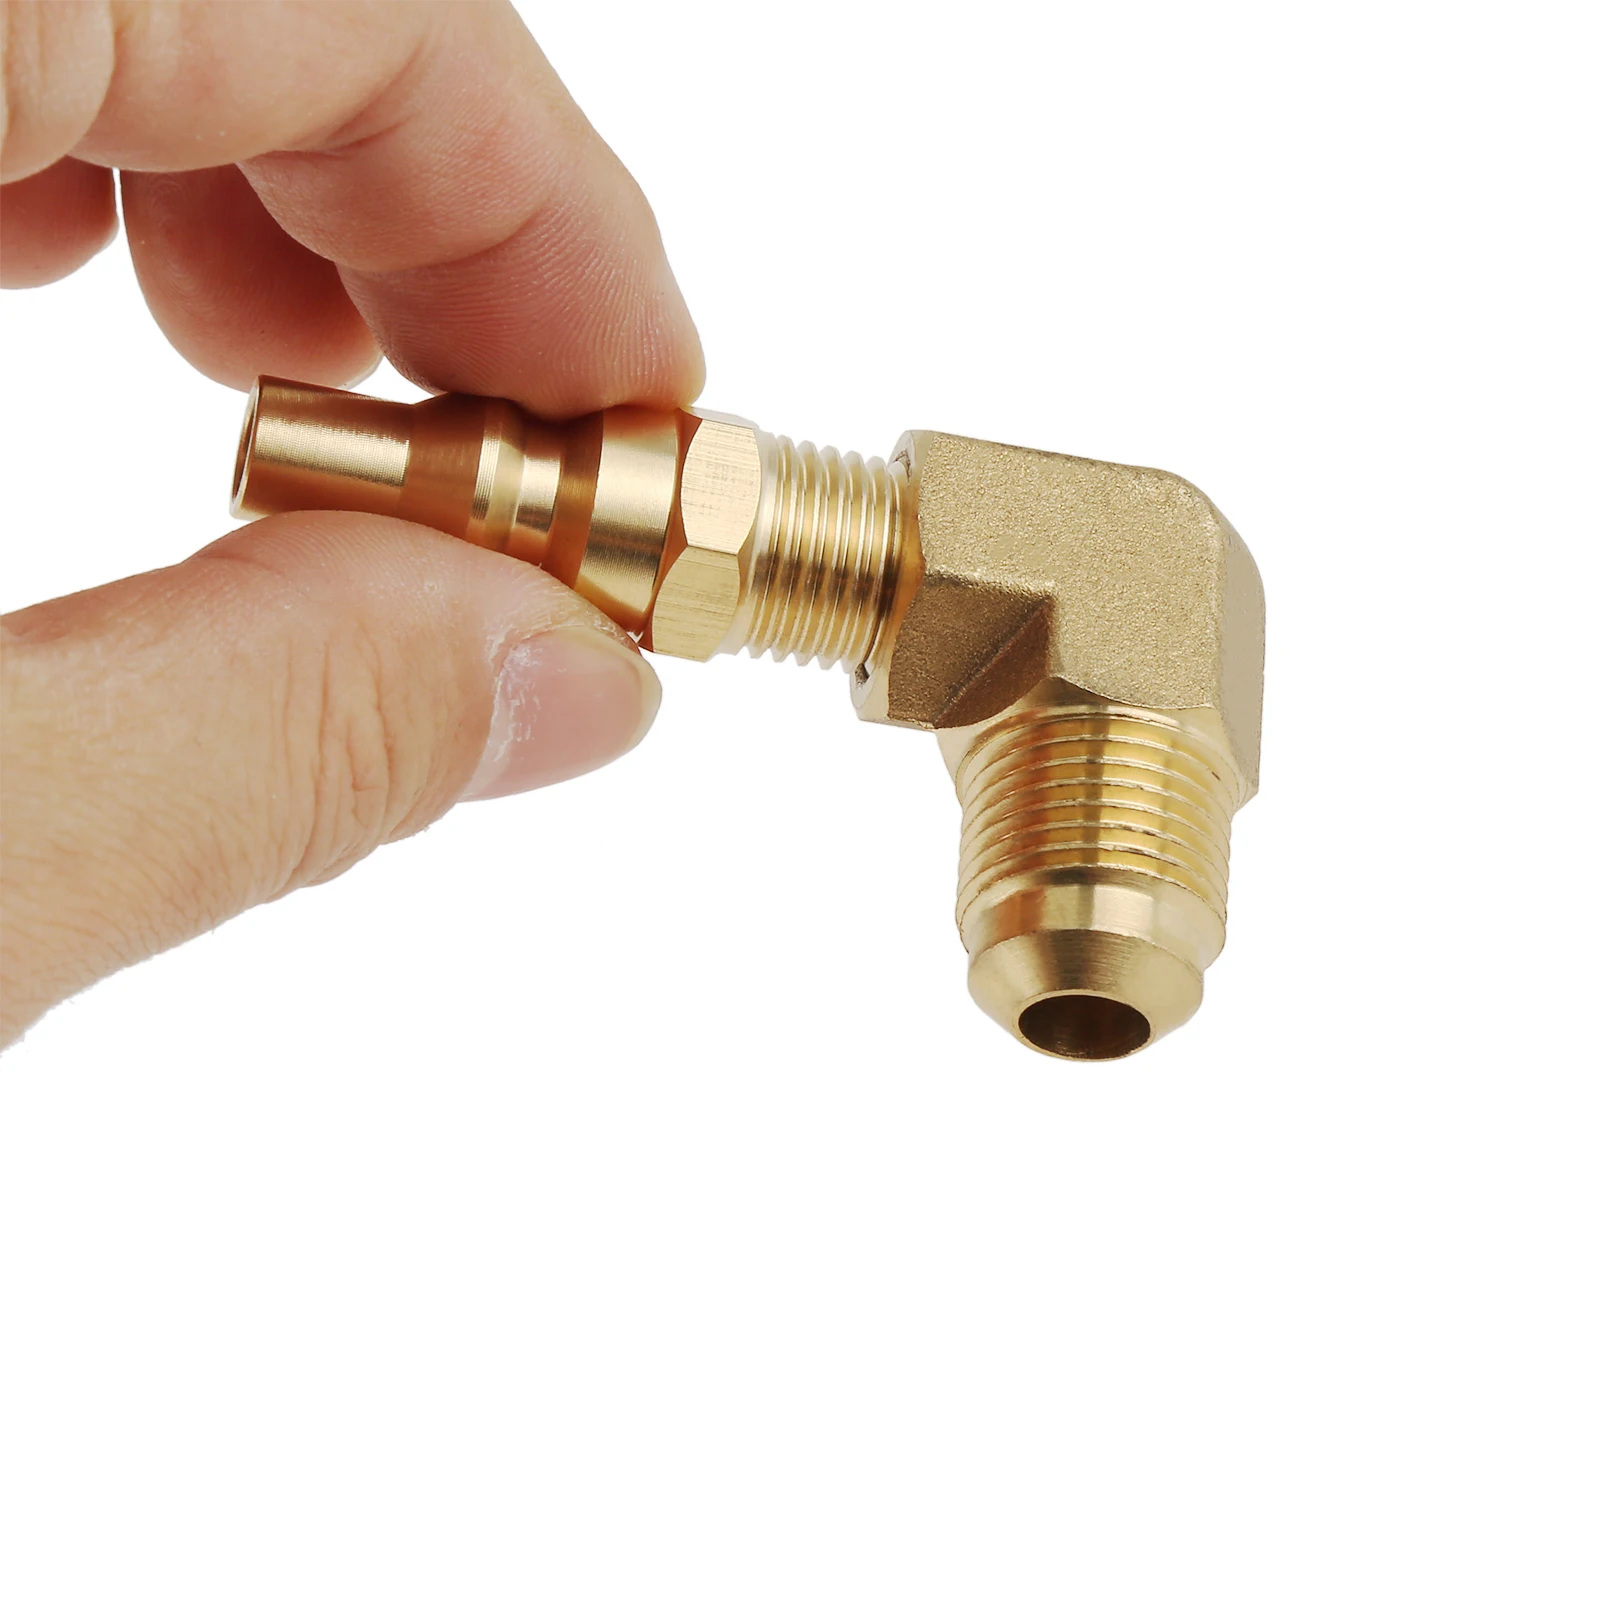 

RV 90 Degree Elbow Brass Connector 3/8" Male Flare X 1/4" Quick Connect for Most Grill, Heaters with Quick Male Fittings 1PC